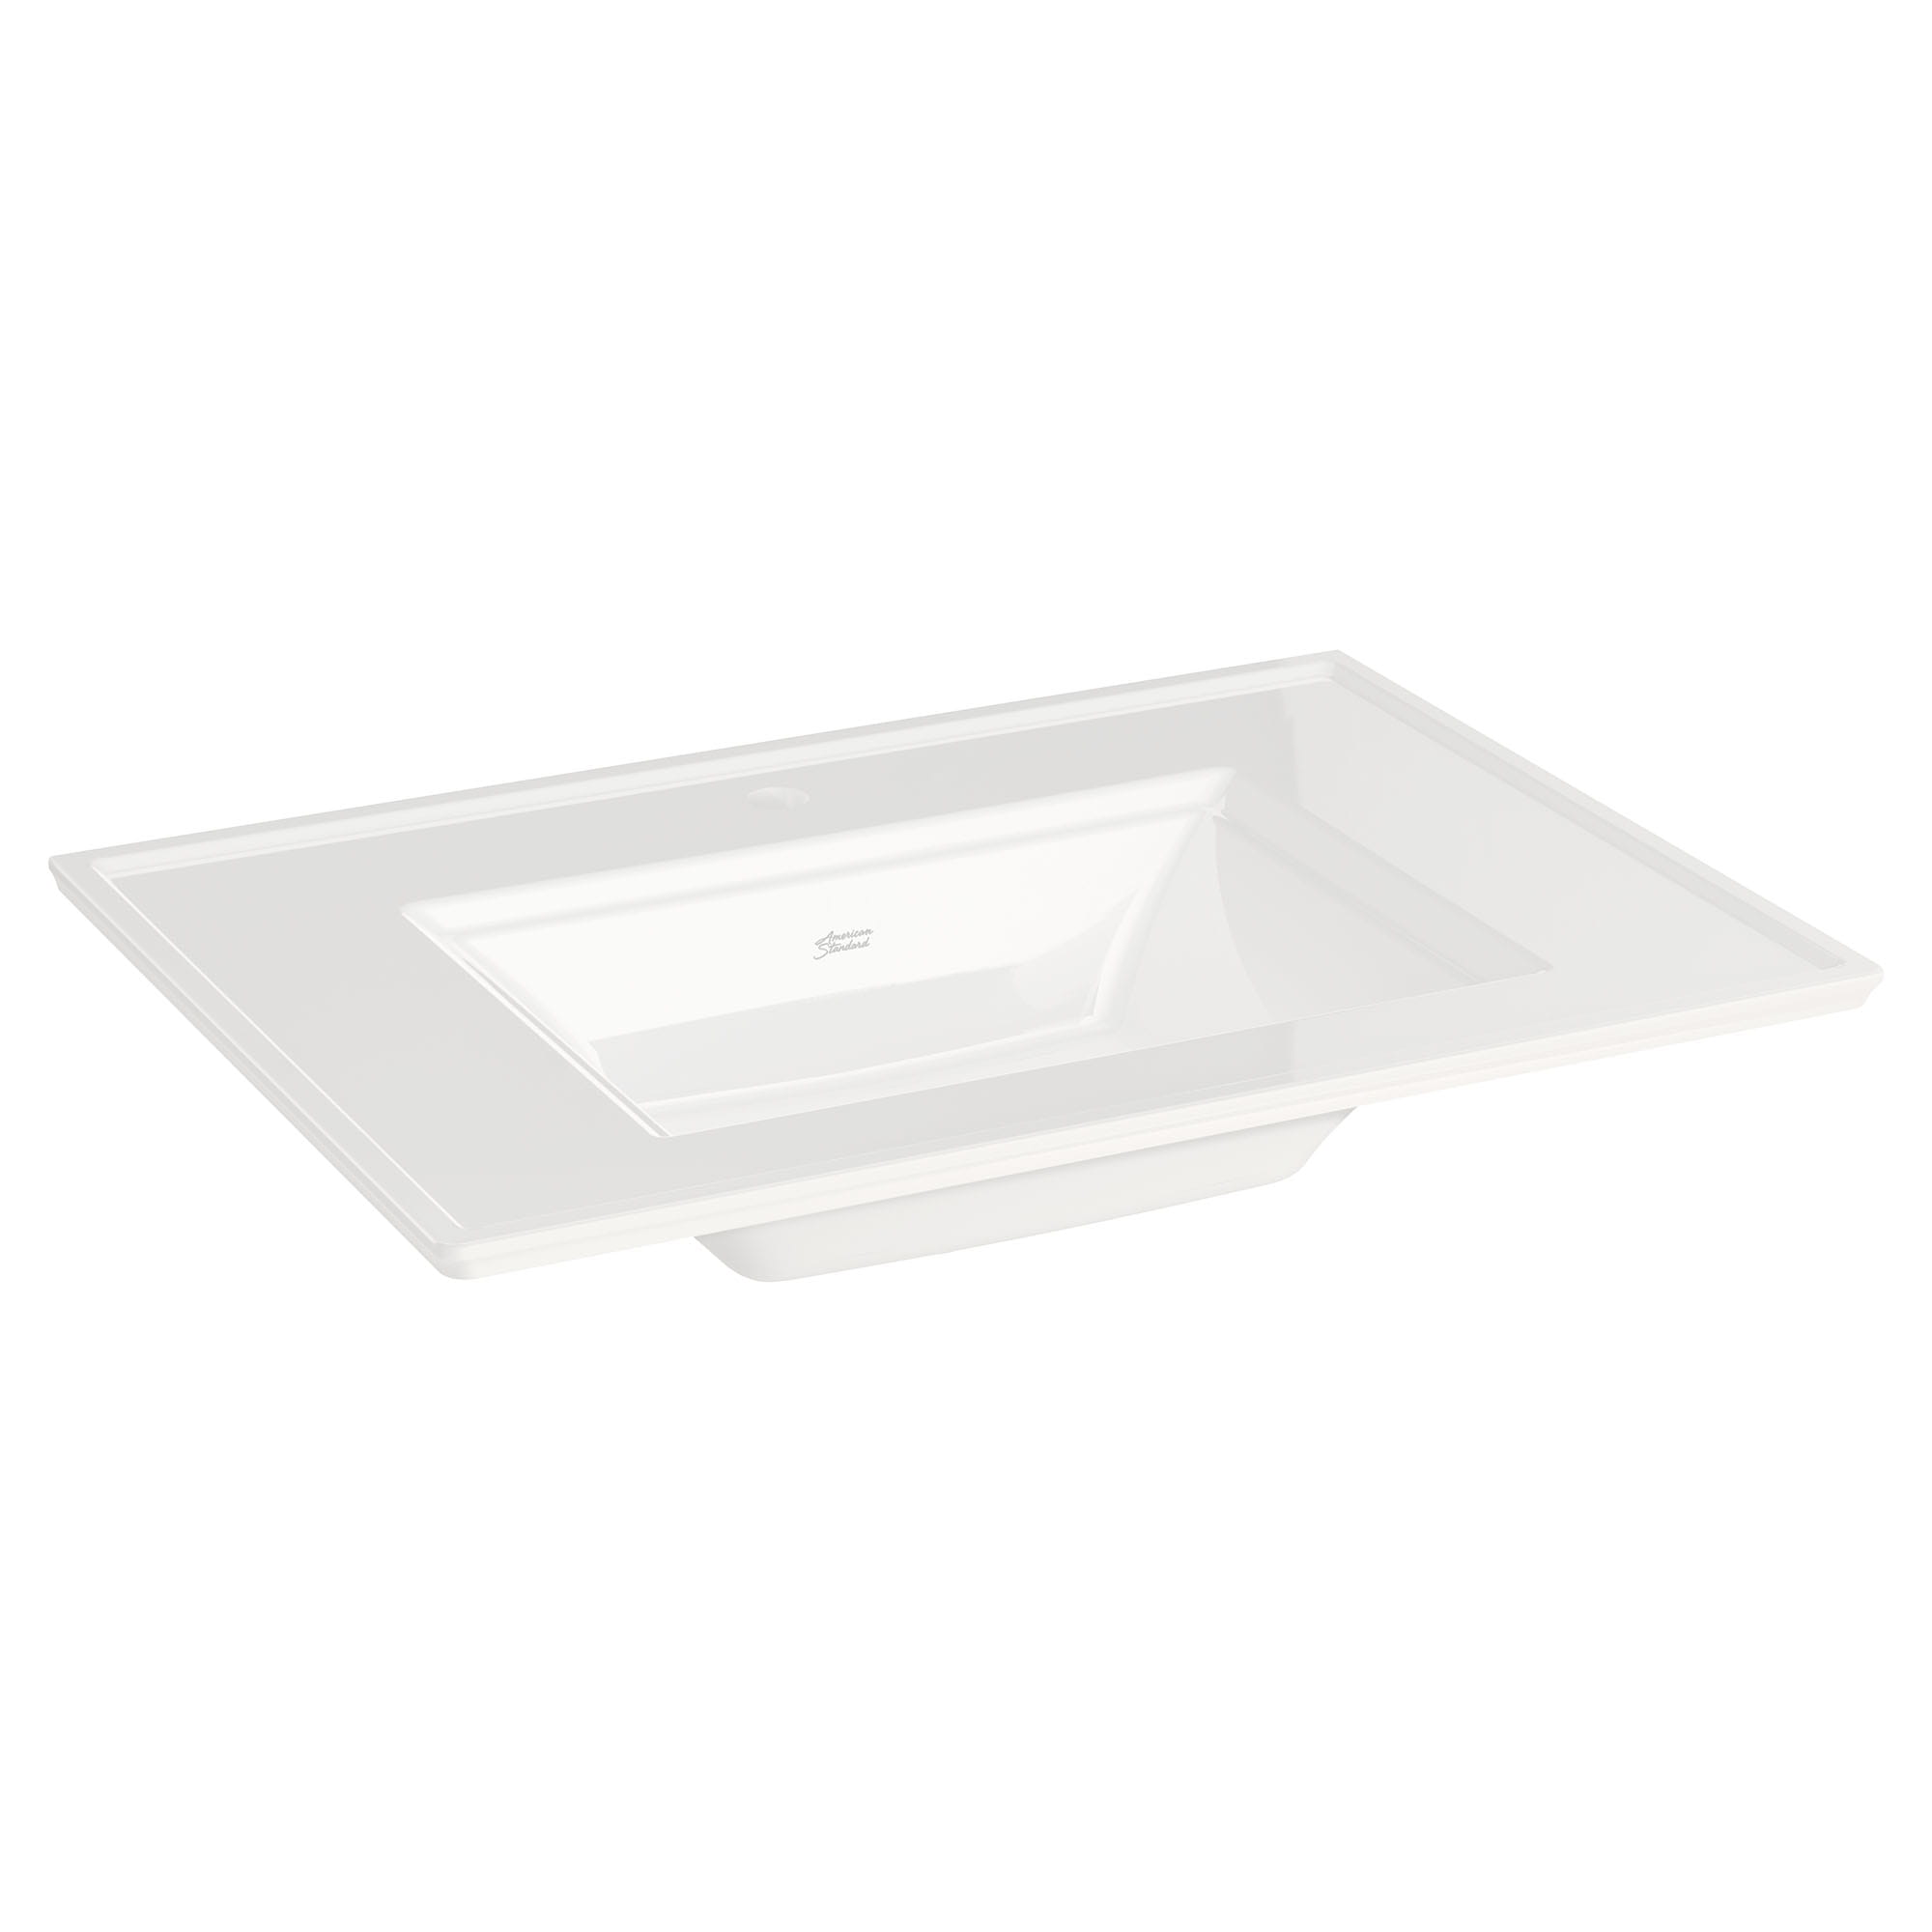 Town Square S Console Vanity Sink Top Center Hole Only WHITE